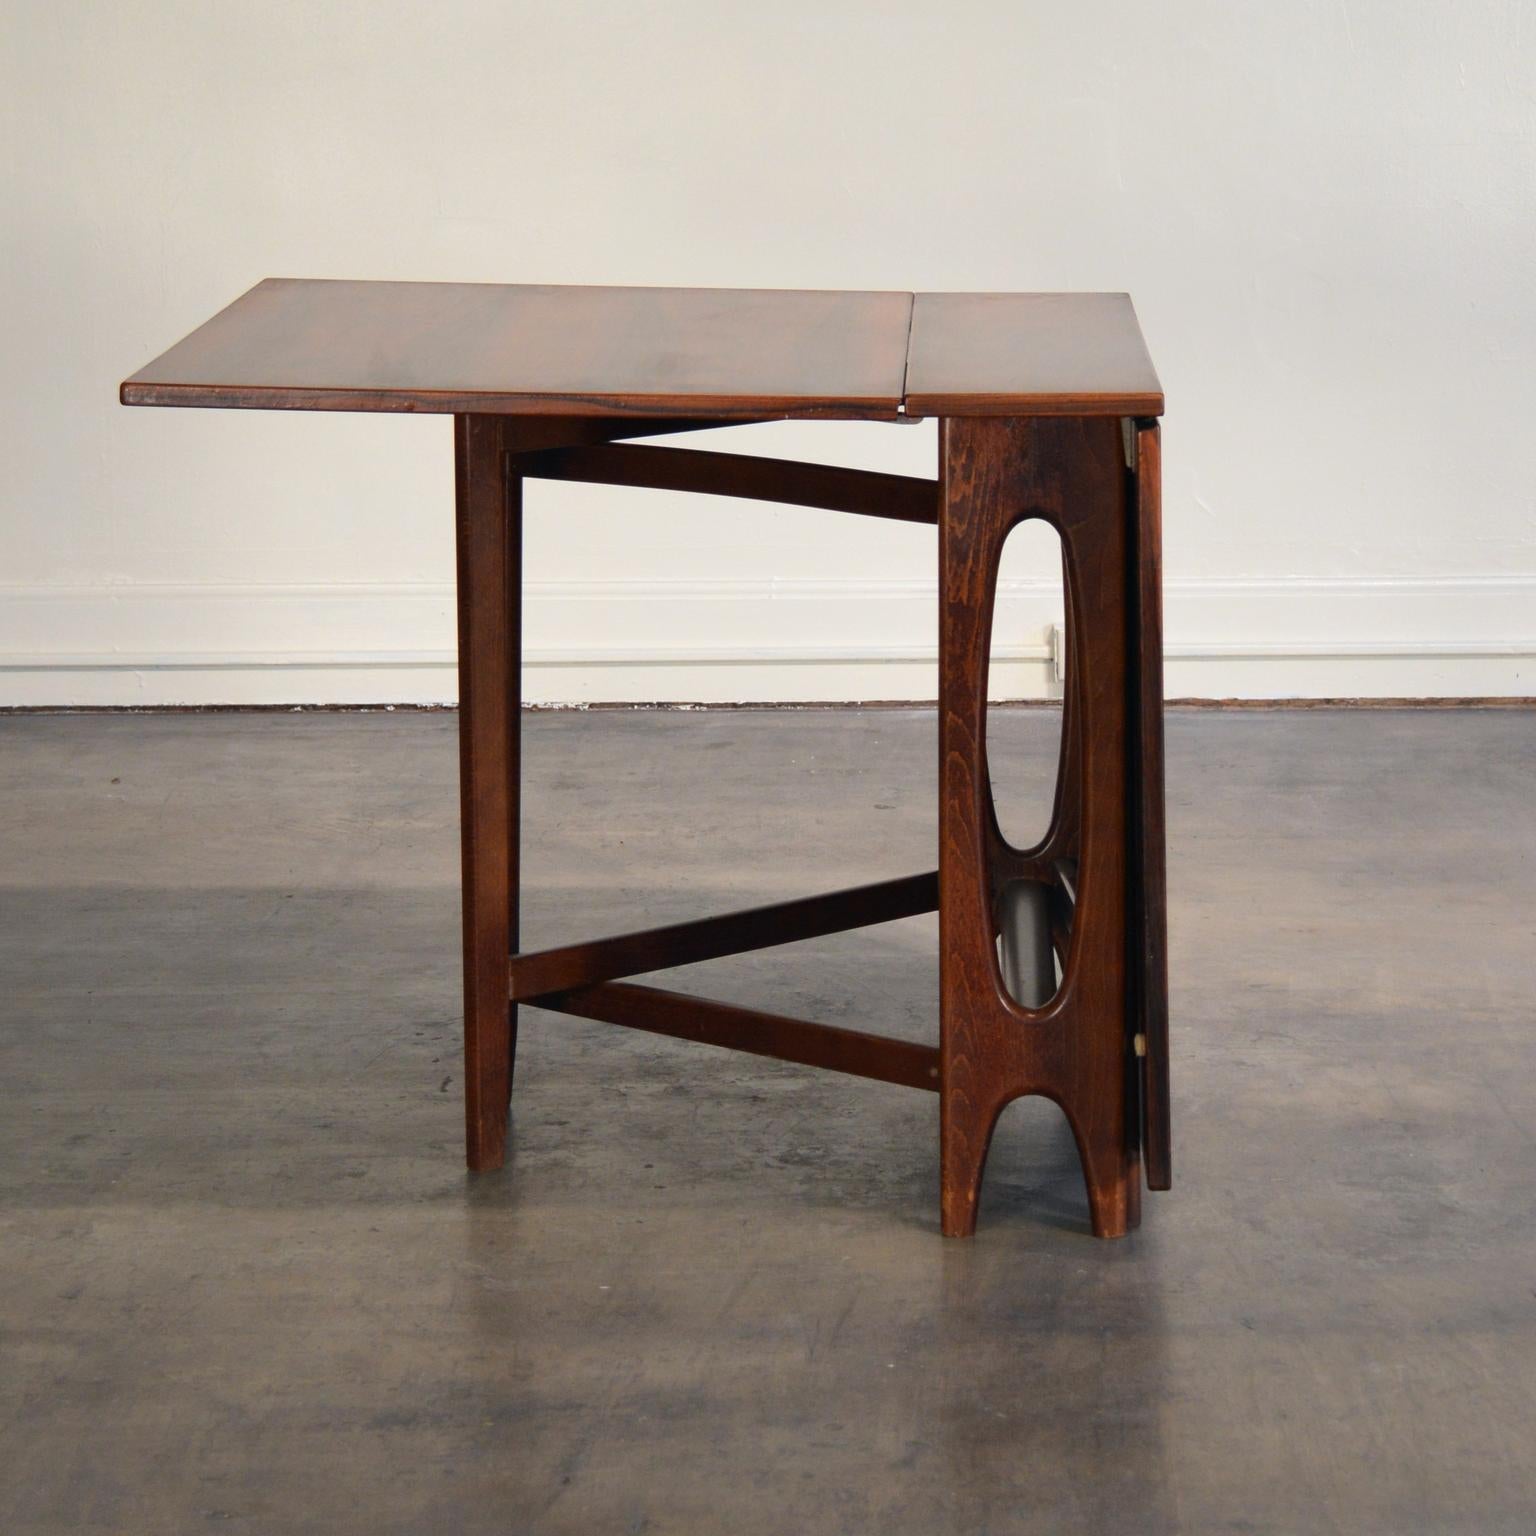 Beatiful gate-leg table in rosewood designed by Bendt Winge, model Nr. 4. rich natural tone to the surface, dark-stained legs. When leaves are folded down, can double as a console table or sofa table; with the leaves extended, a lightweight and